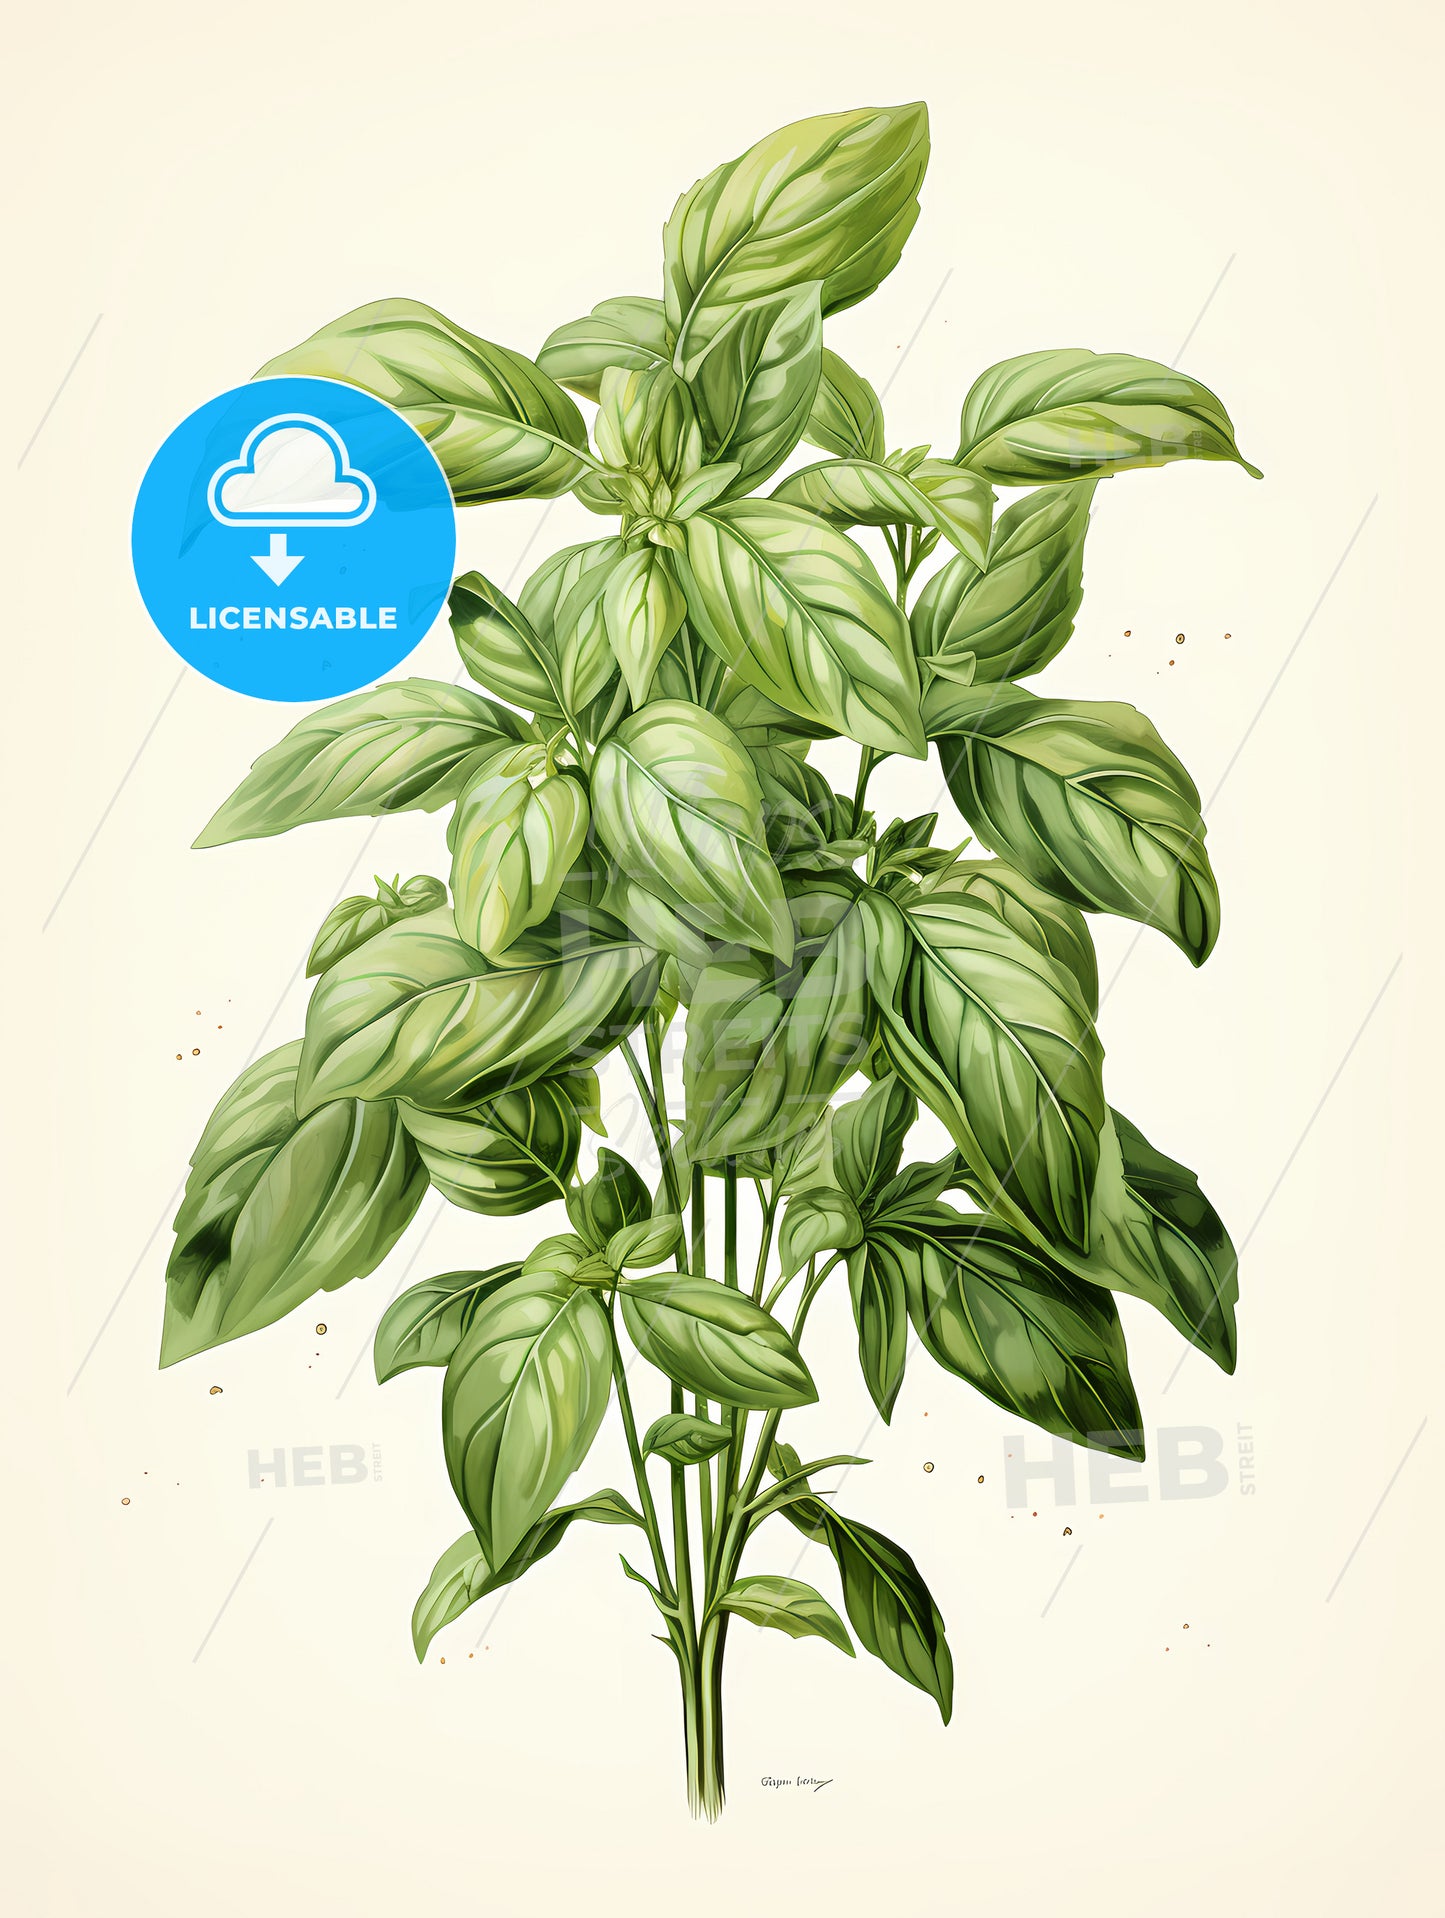 Basil - A Plant With Green Leaves